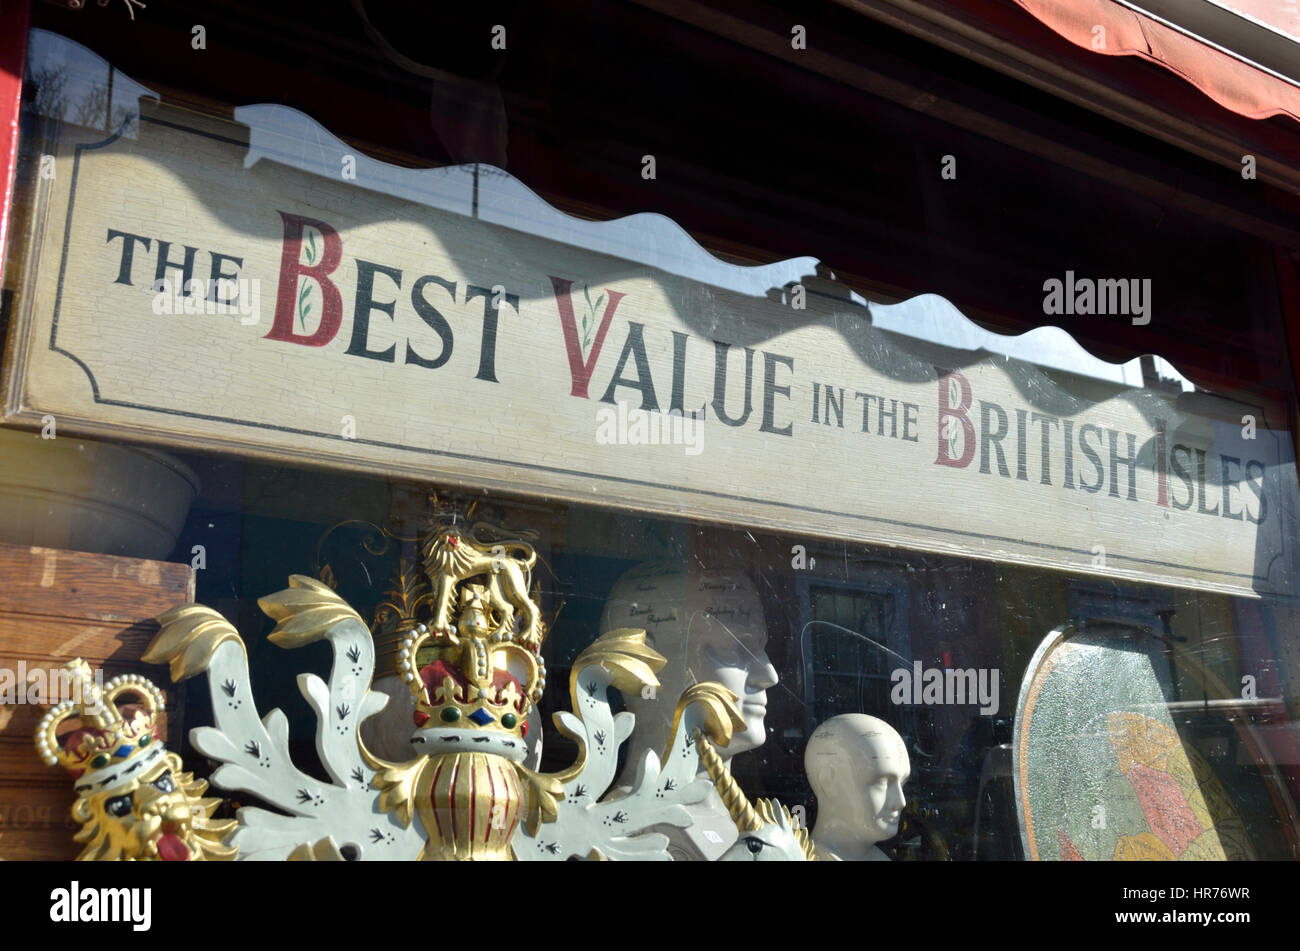 ’The best value in the British Isles’ sign in an antique shop window Stock Photo